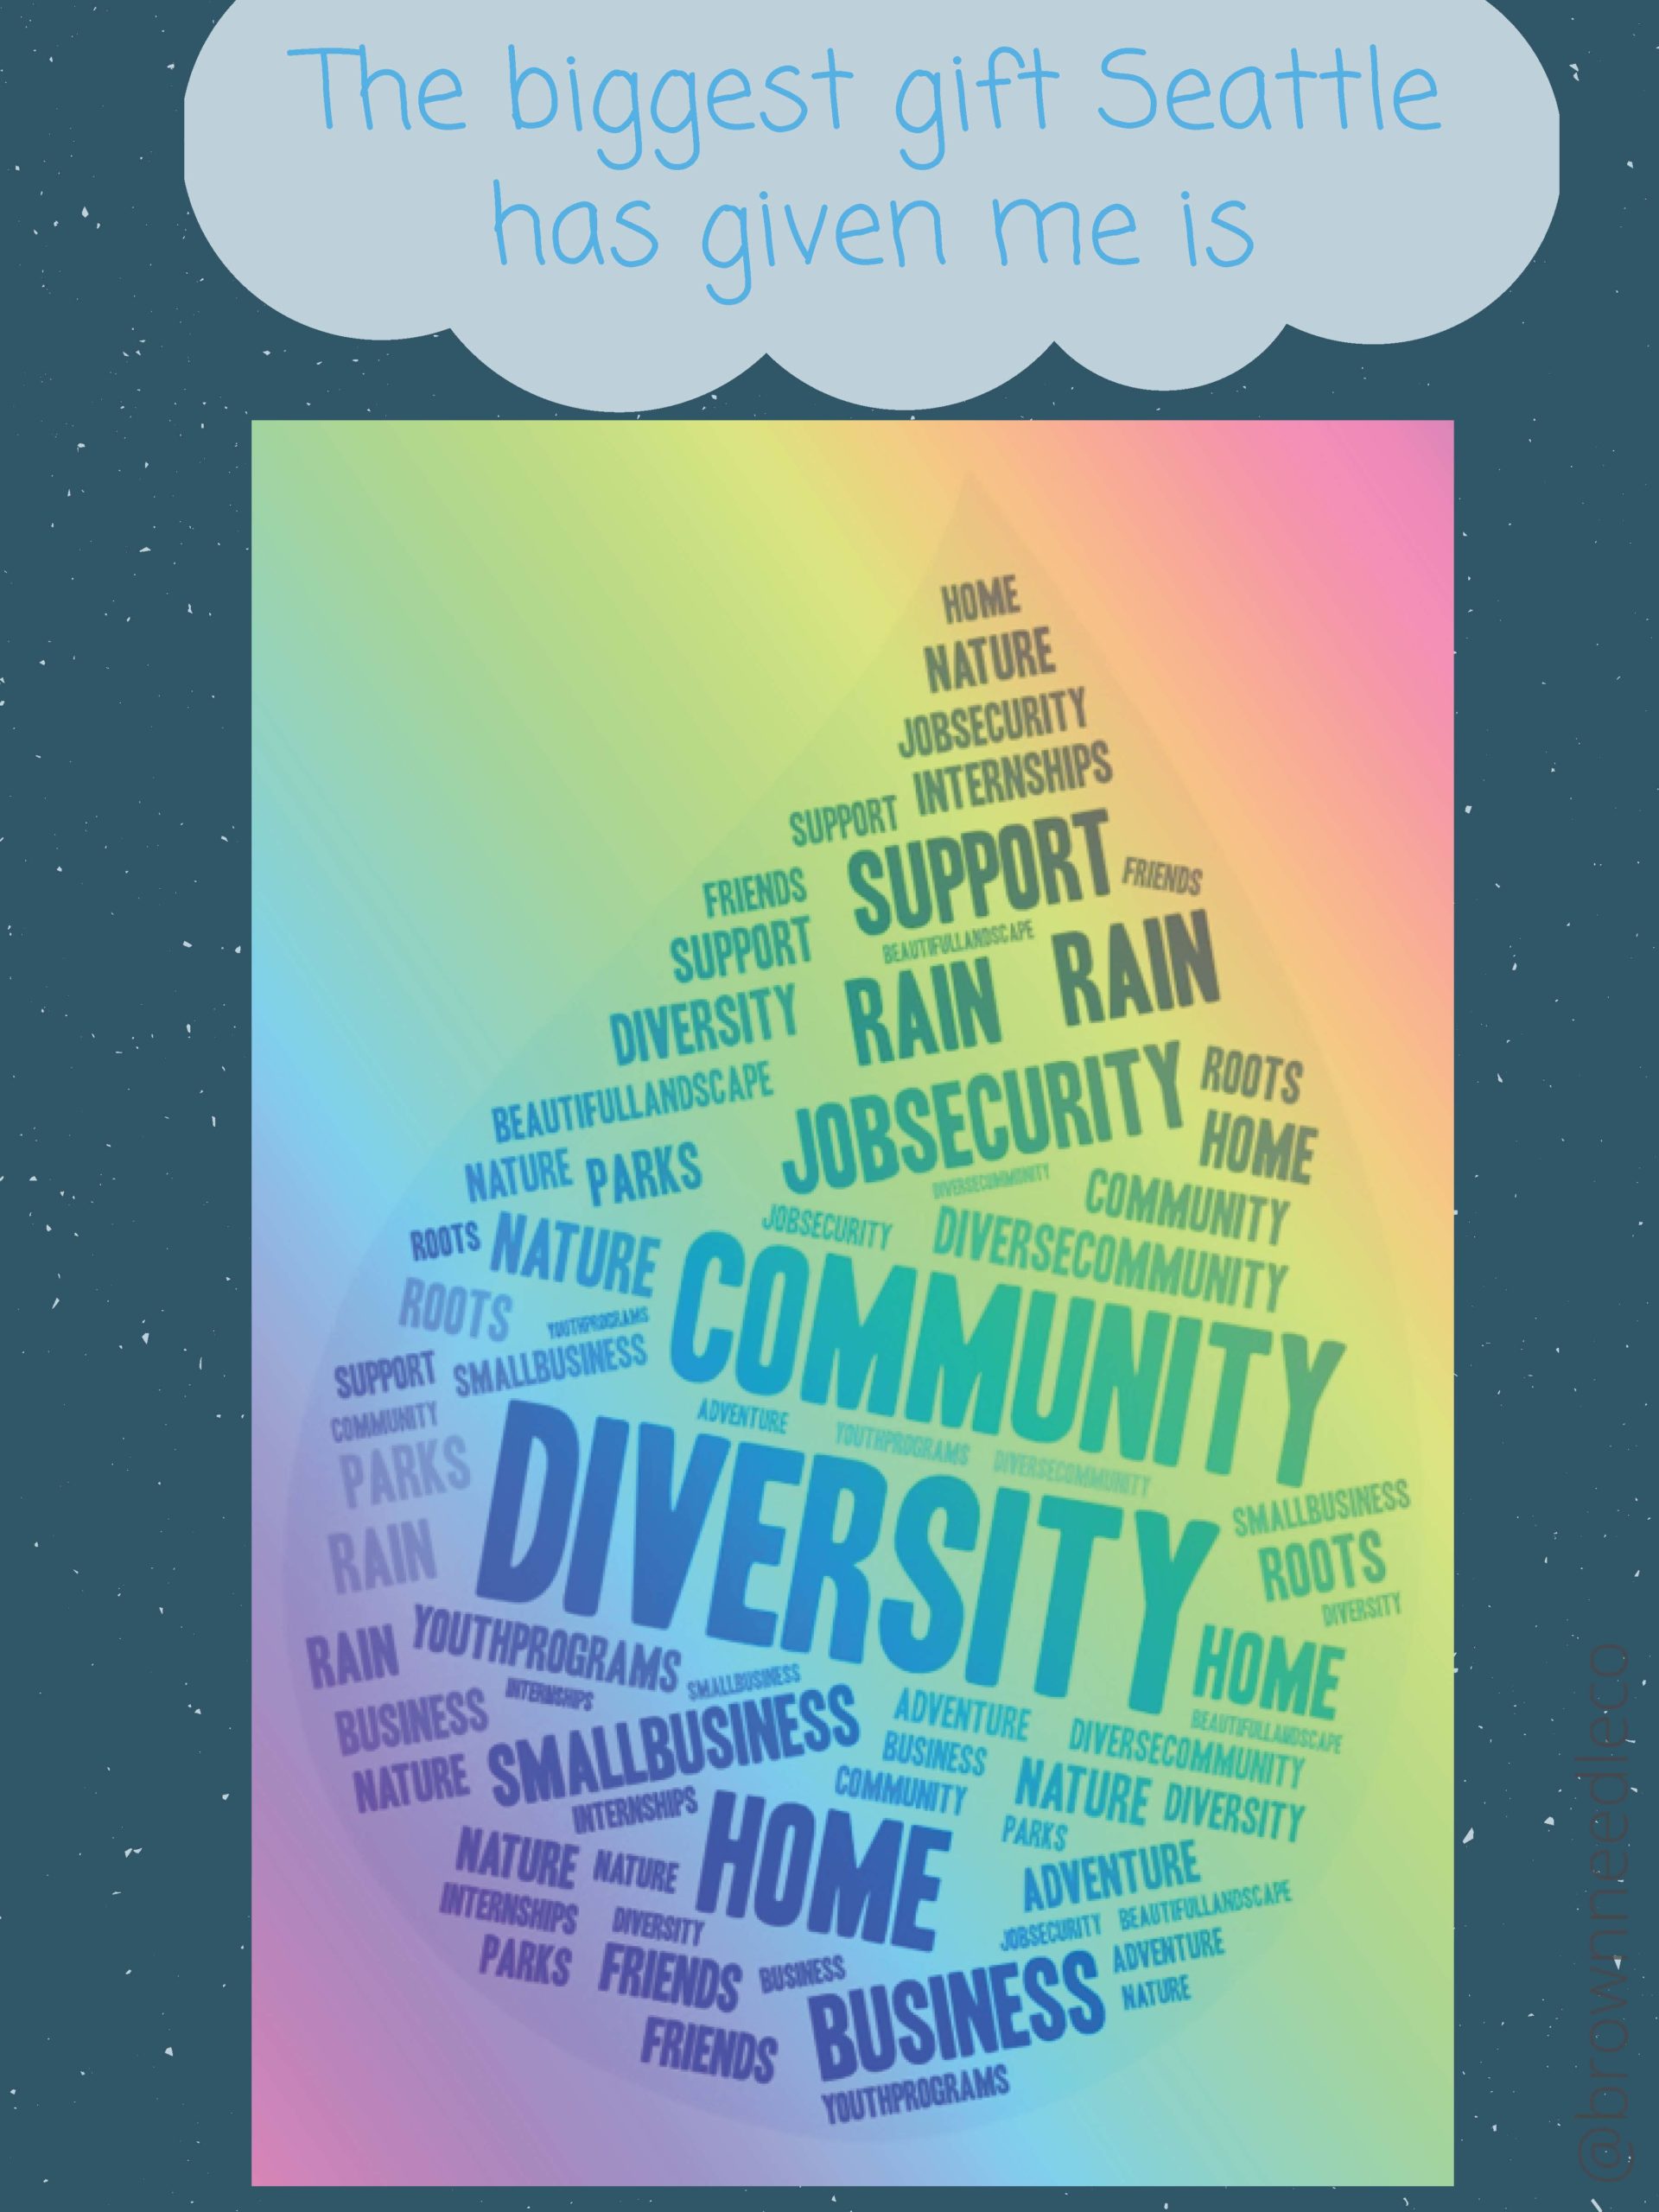 word cloud with following dominant words: diversity, community, home, rain, support, nature, job security, small business, friends, roots, business